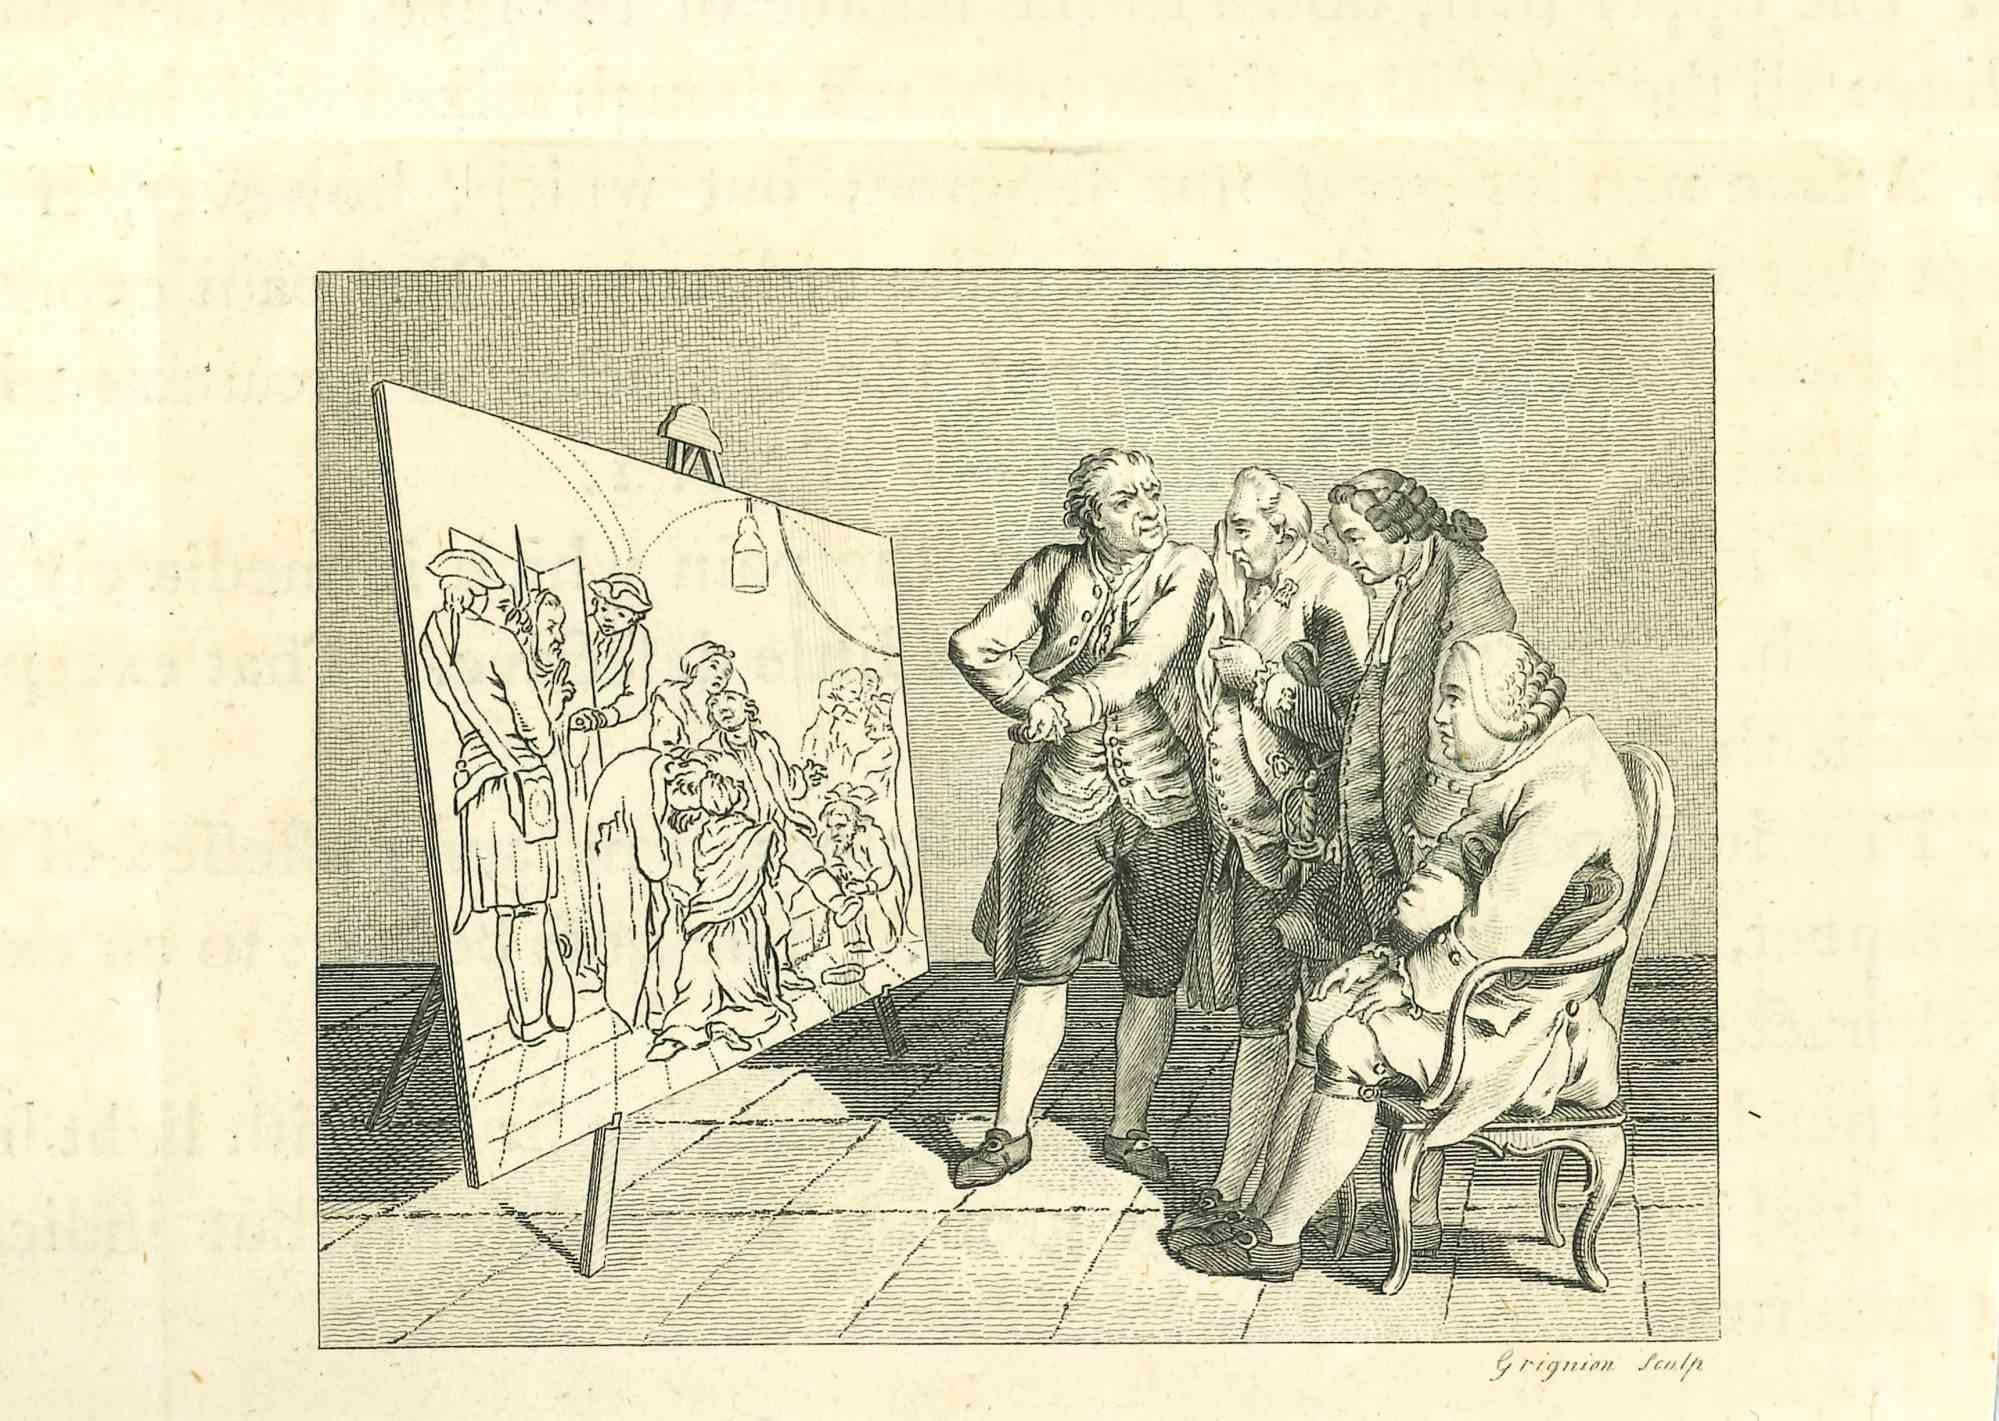 The Physiognomy -The painting is an original etching artwork realized by Thomas Holloway for Johann Caspar Lavater's "Essays on Physiognomy, Designed to Promote the Knowledge and the Love of Mankind", London, Bensley, 1810. 

With the script on the